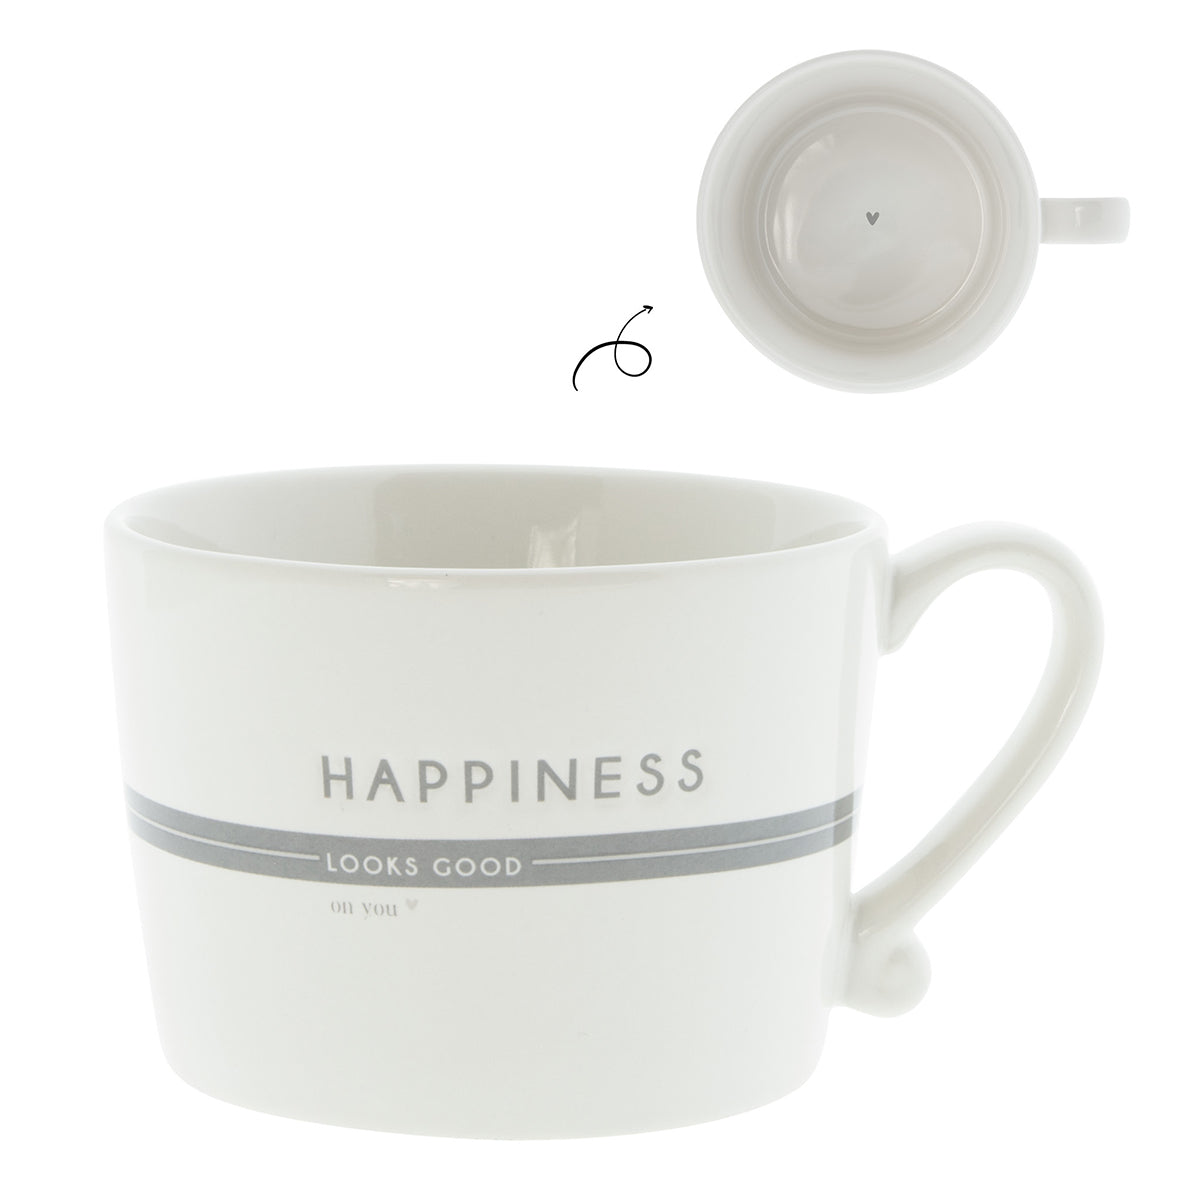 "Happines" cup